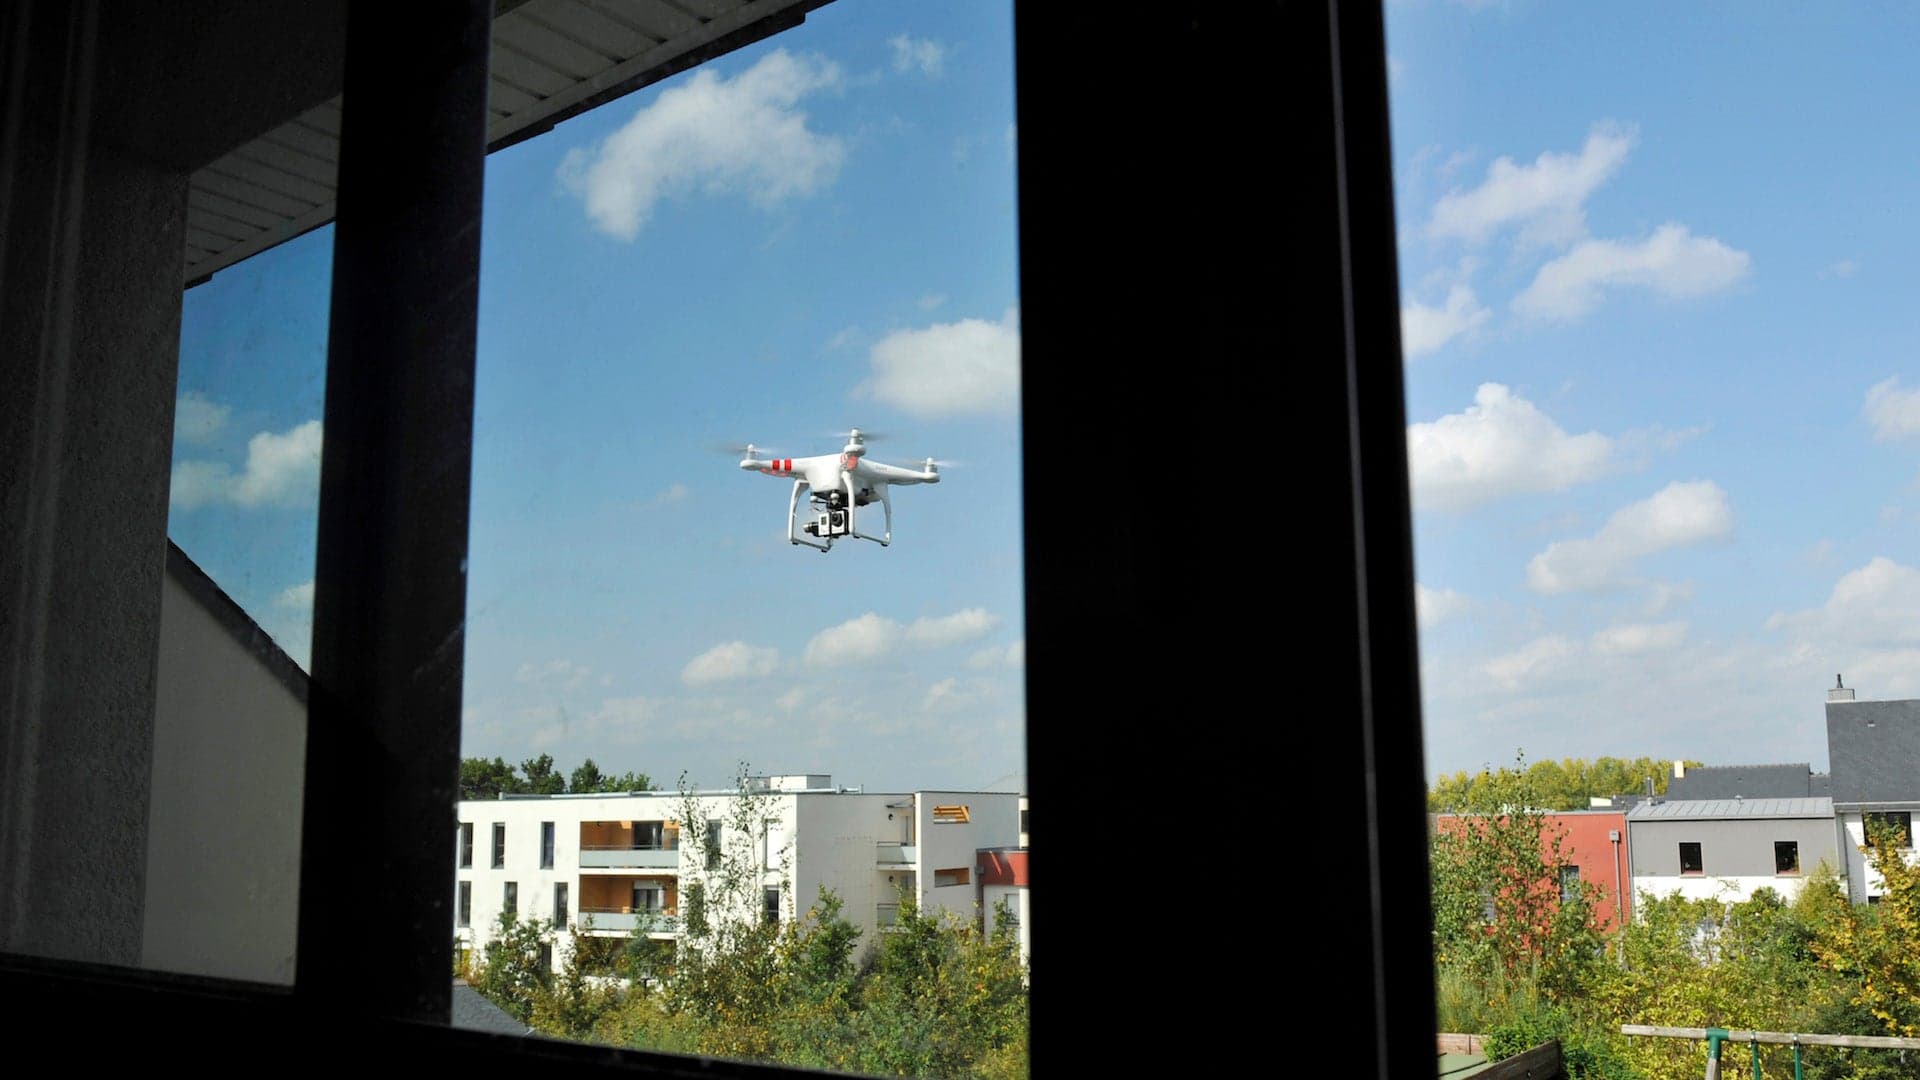 Ohio School Districts Permit Police to Aerially Survey Schools for Public Safety